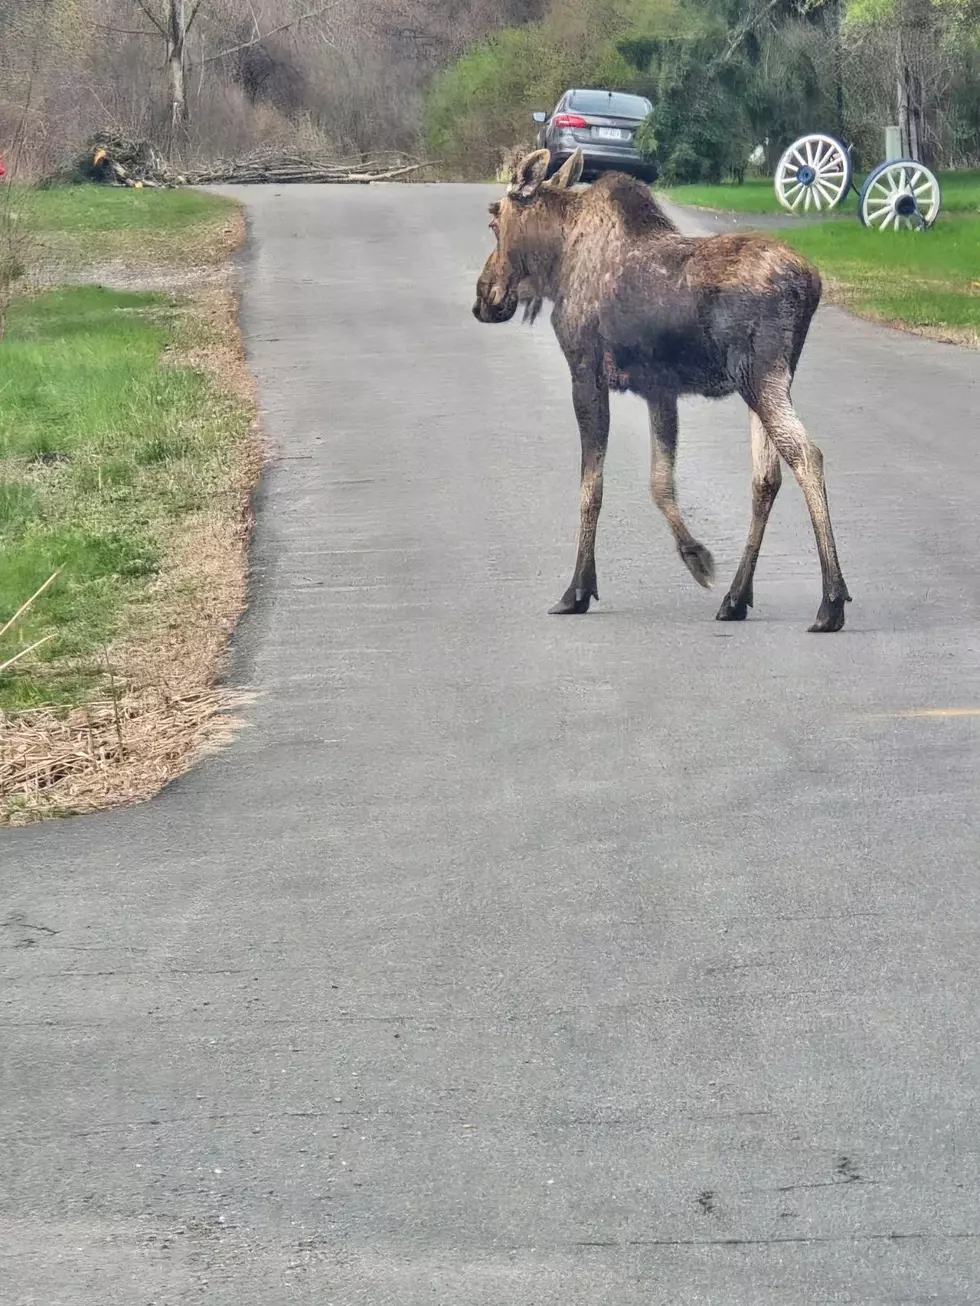 Police Remind Public As Moose Spotted in Residential Area in NY